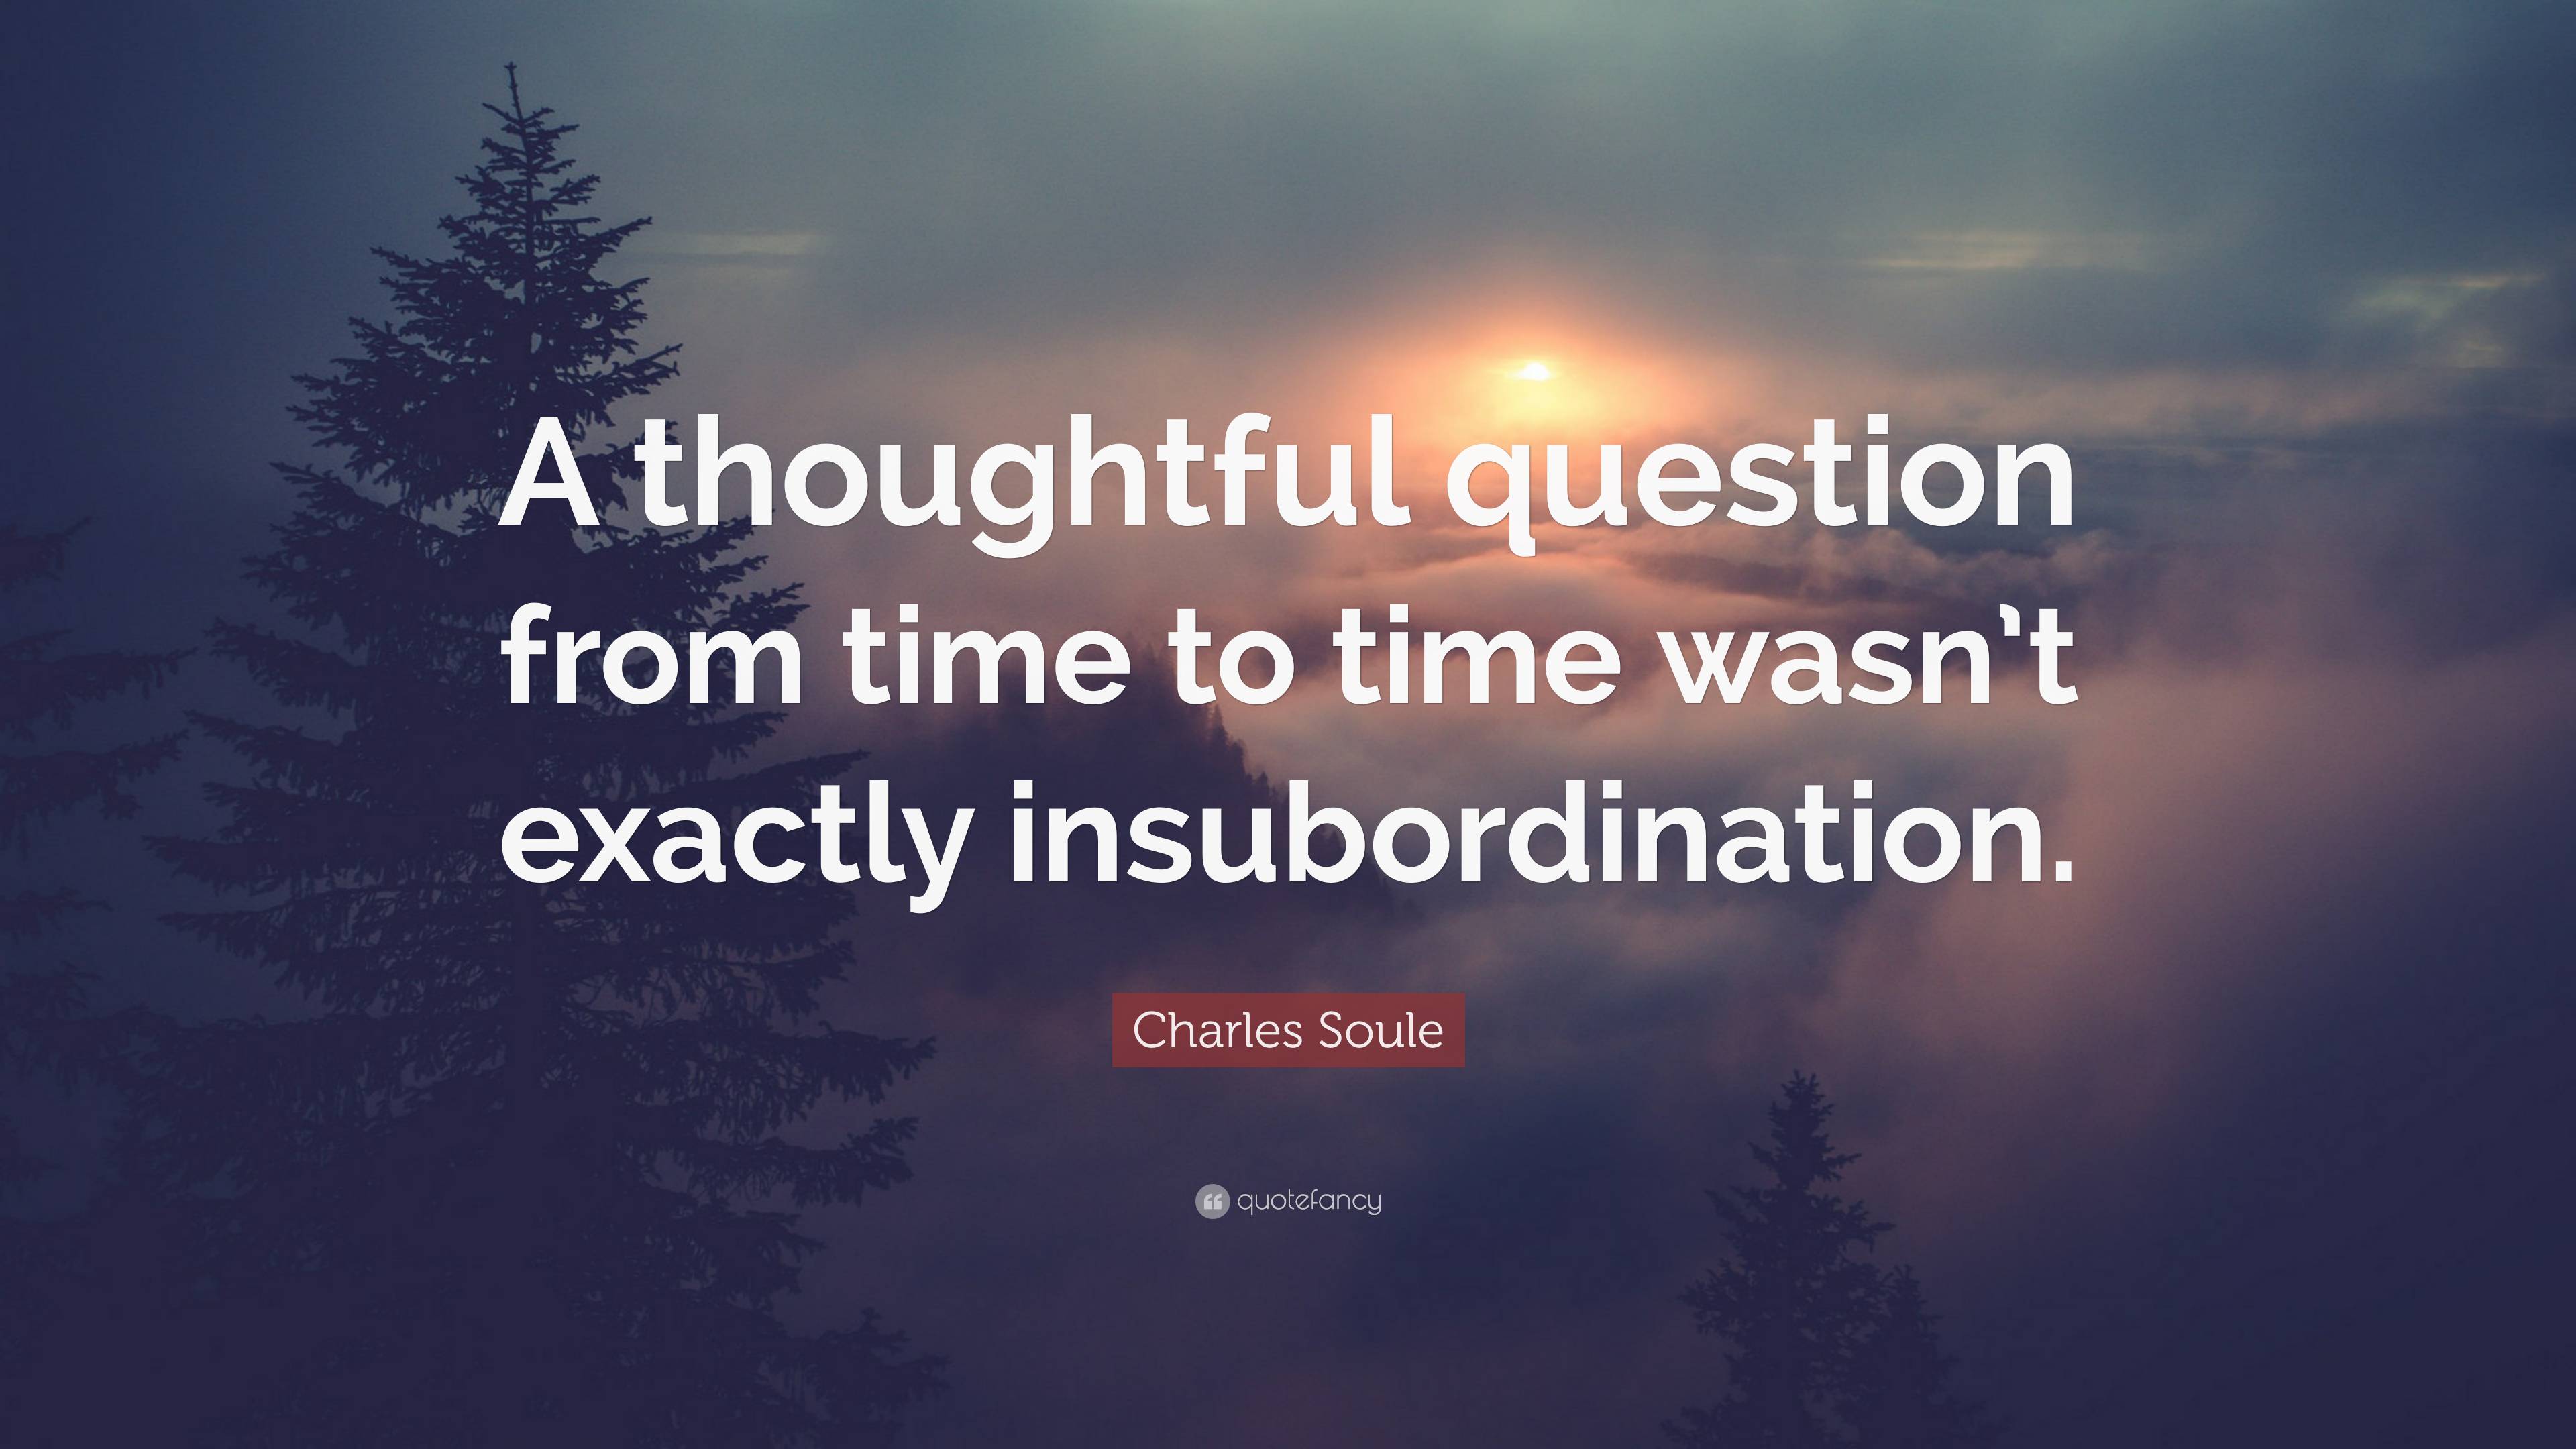 Charles Soule Quote: “A thoughtful question from time to time wasn't  exactly insubordination.”